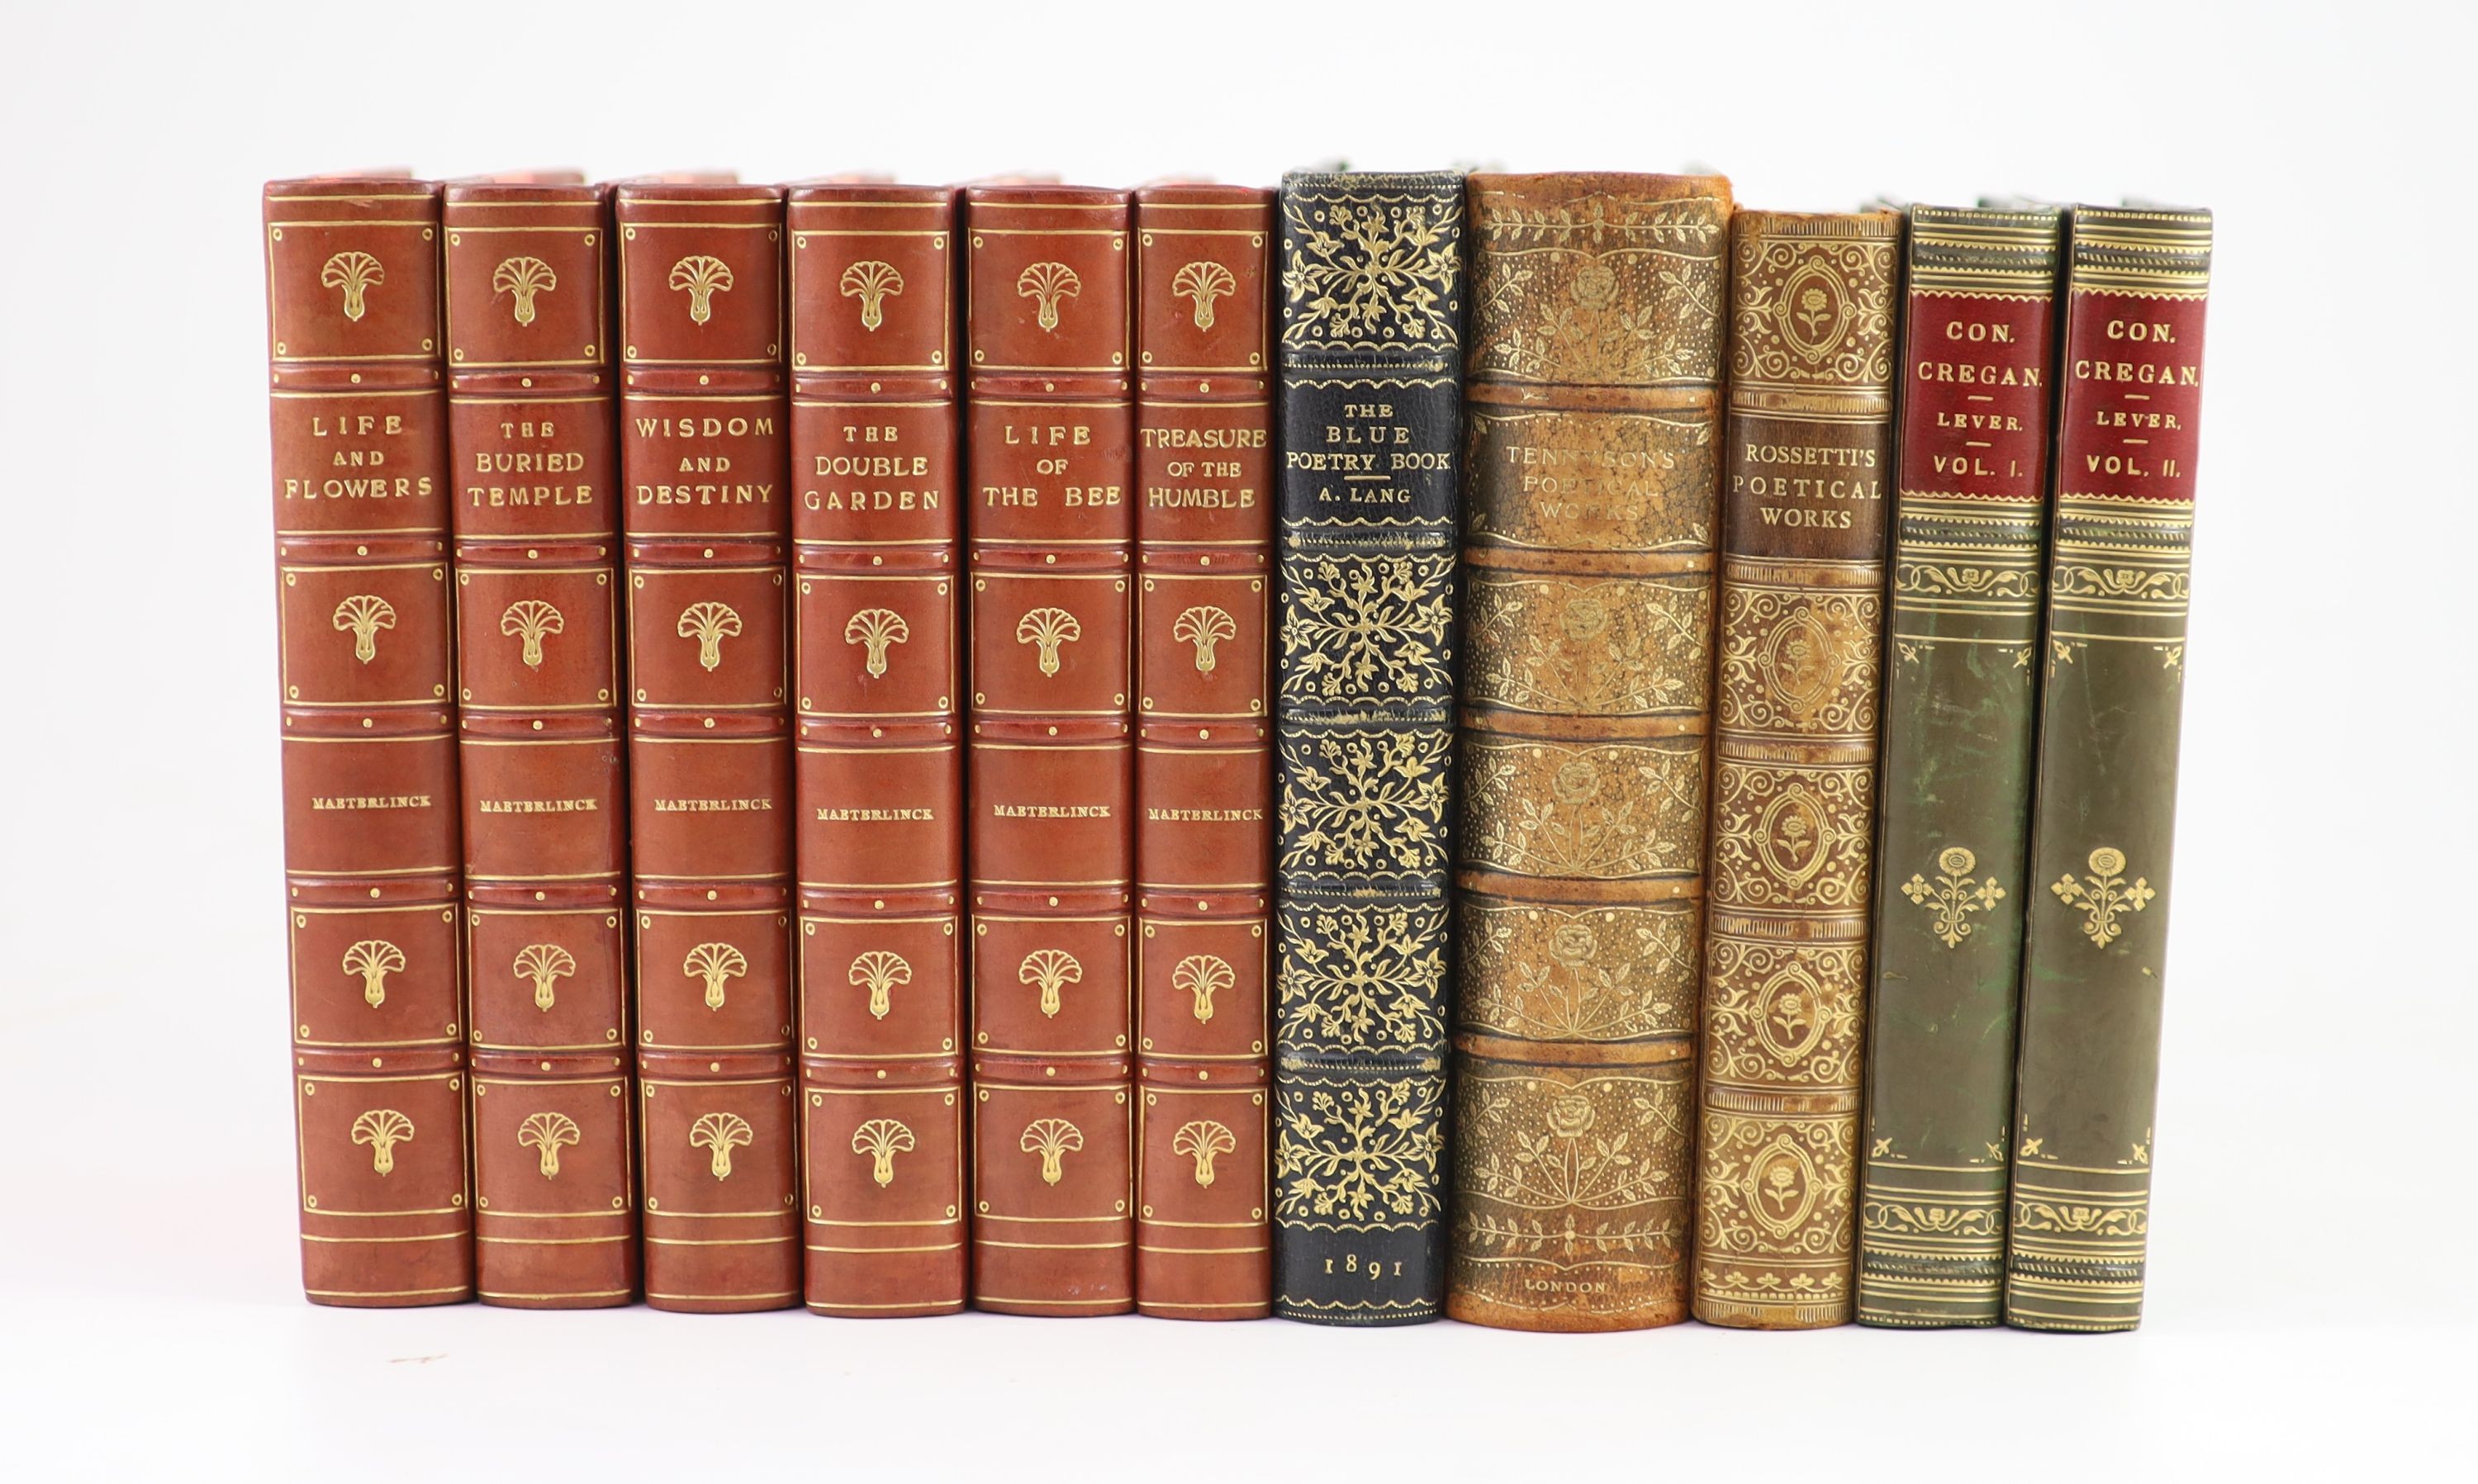 Maeterlinck, Maurice - Works, 6 vols, 8vo, half calf, George Allen, London, 1902-10; Lever, Charles - Confessions of Con. Cregan. 2 vols, London, c.1849; and 3 others (12)